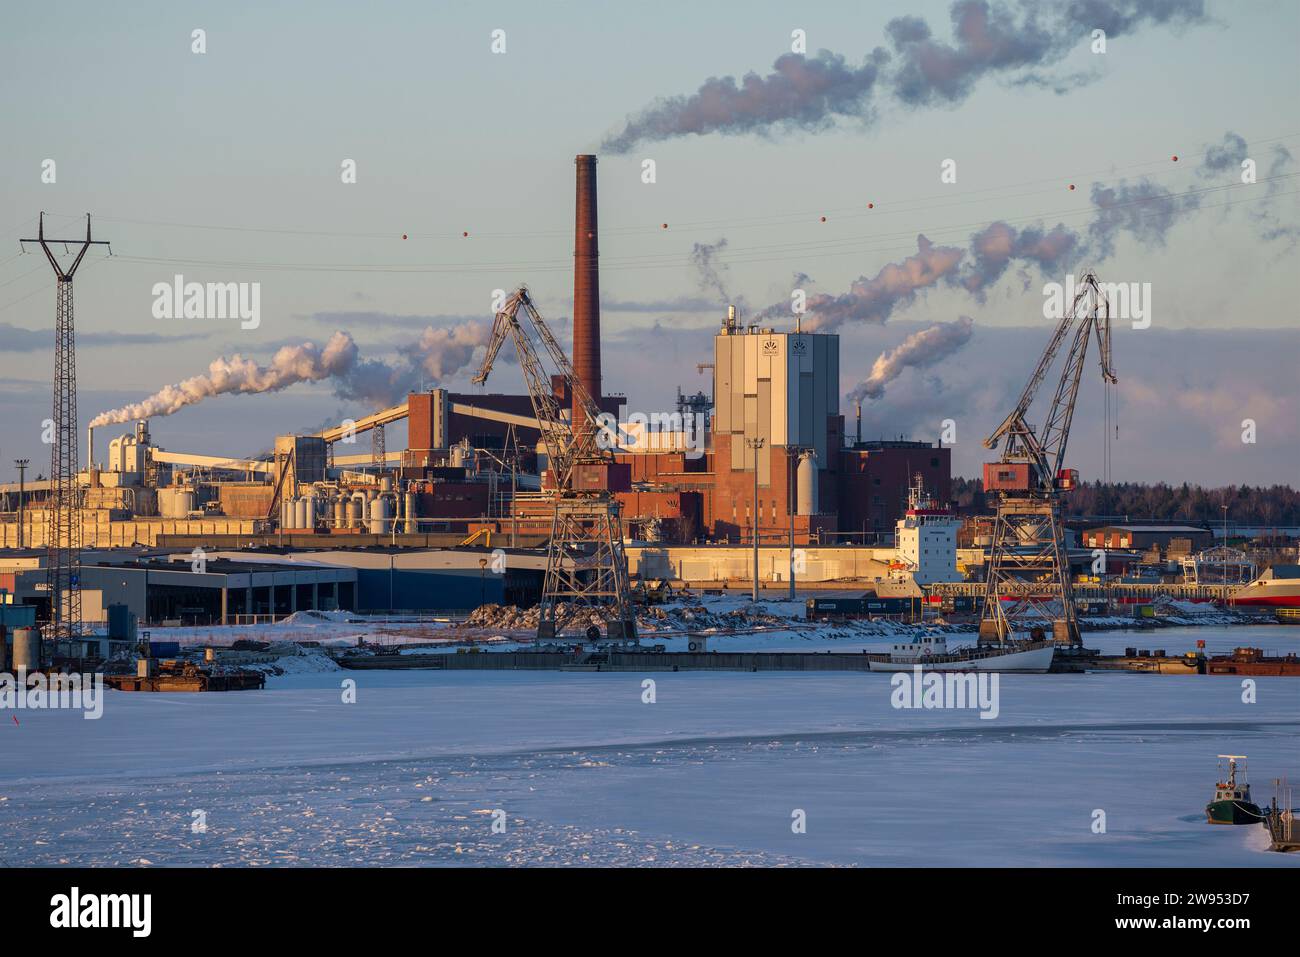 KOTKA, FINLAND - MARCH 08, 2019: Pulp and paper mill 'Sunila' on a lilac March evening Stock Photo